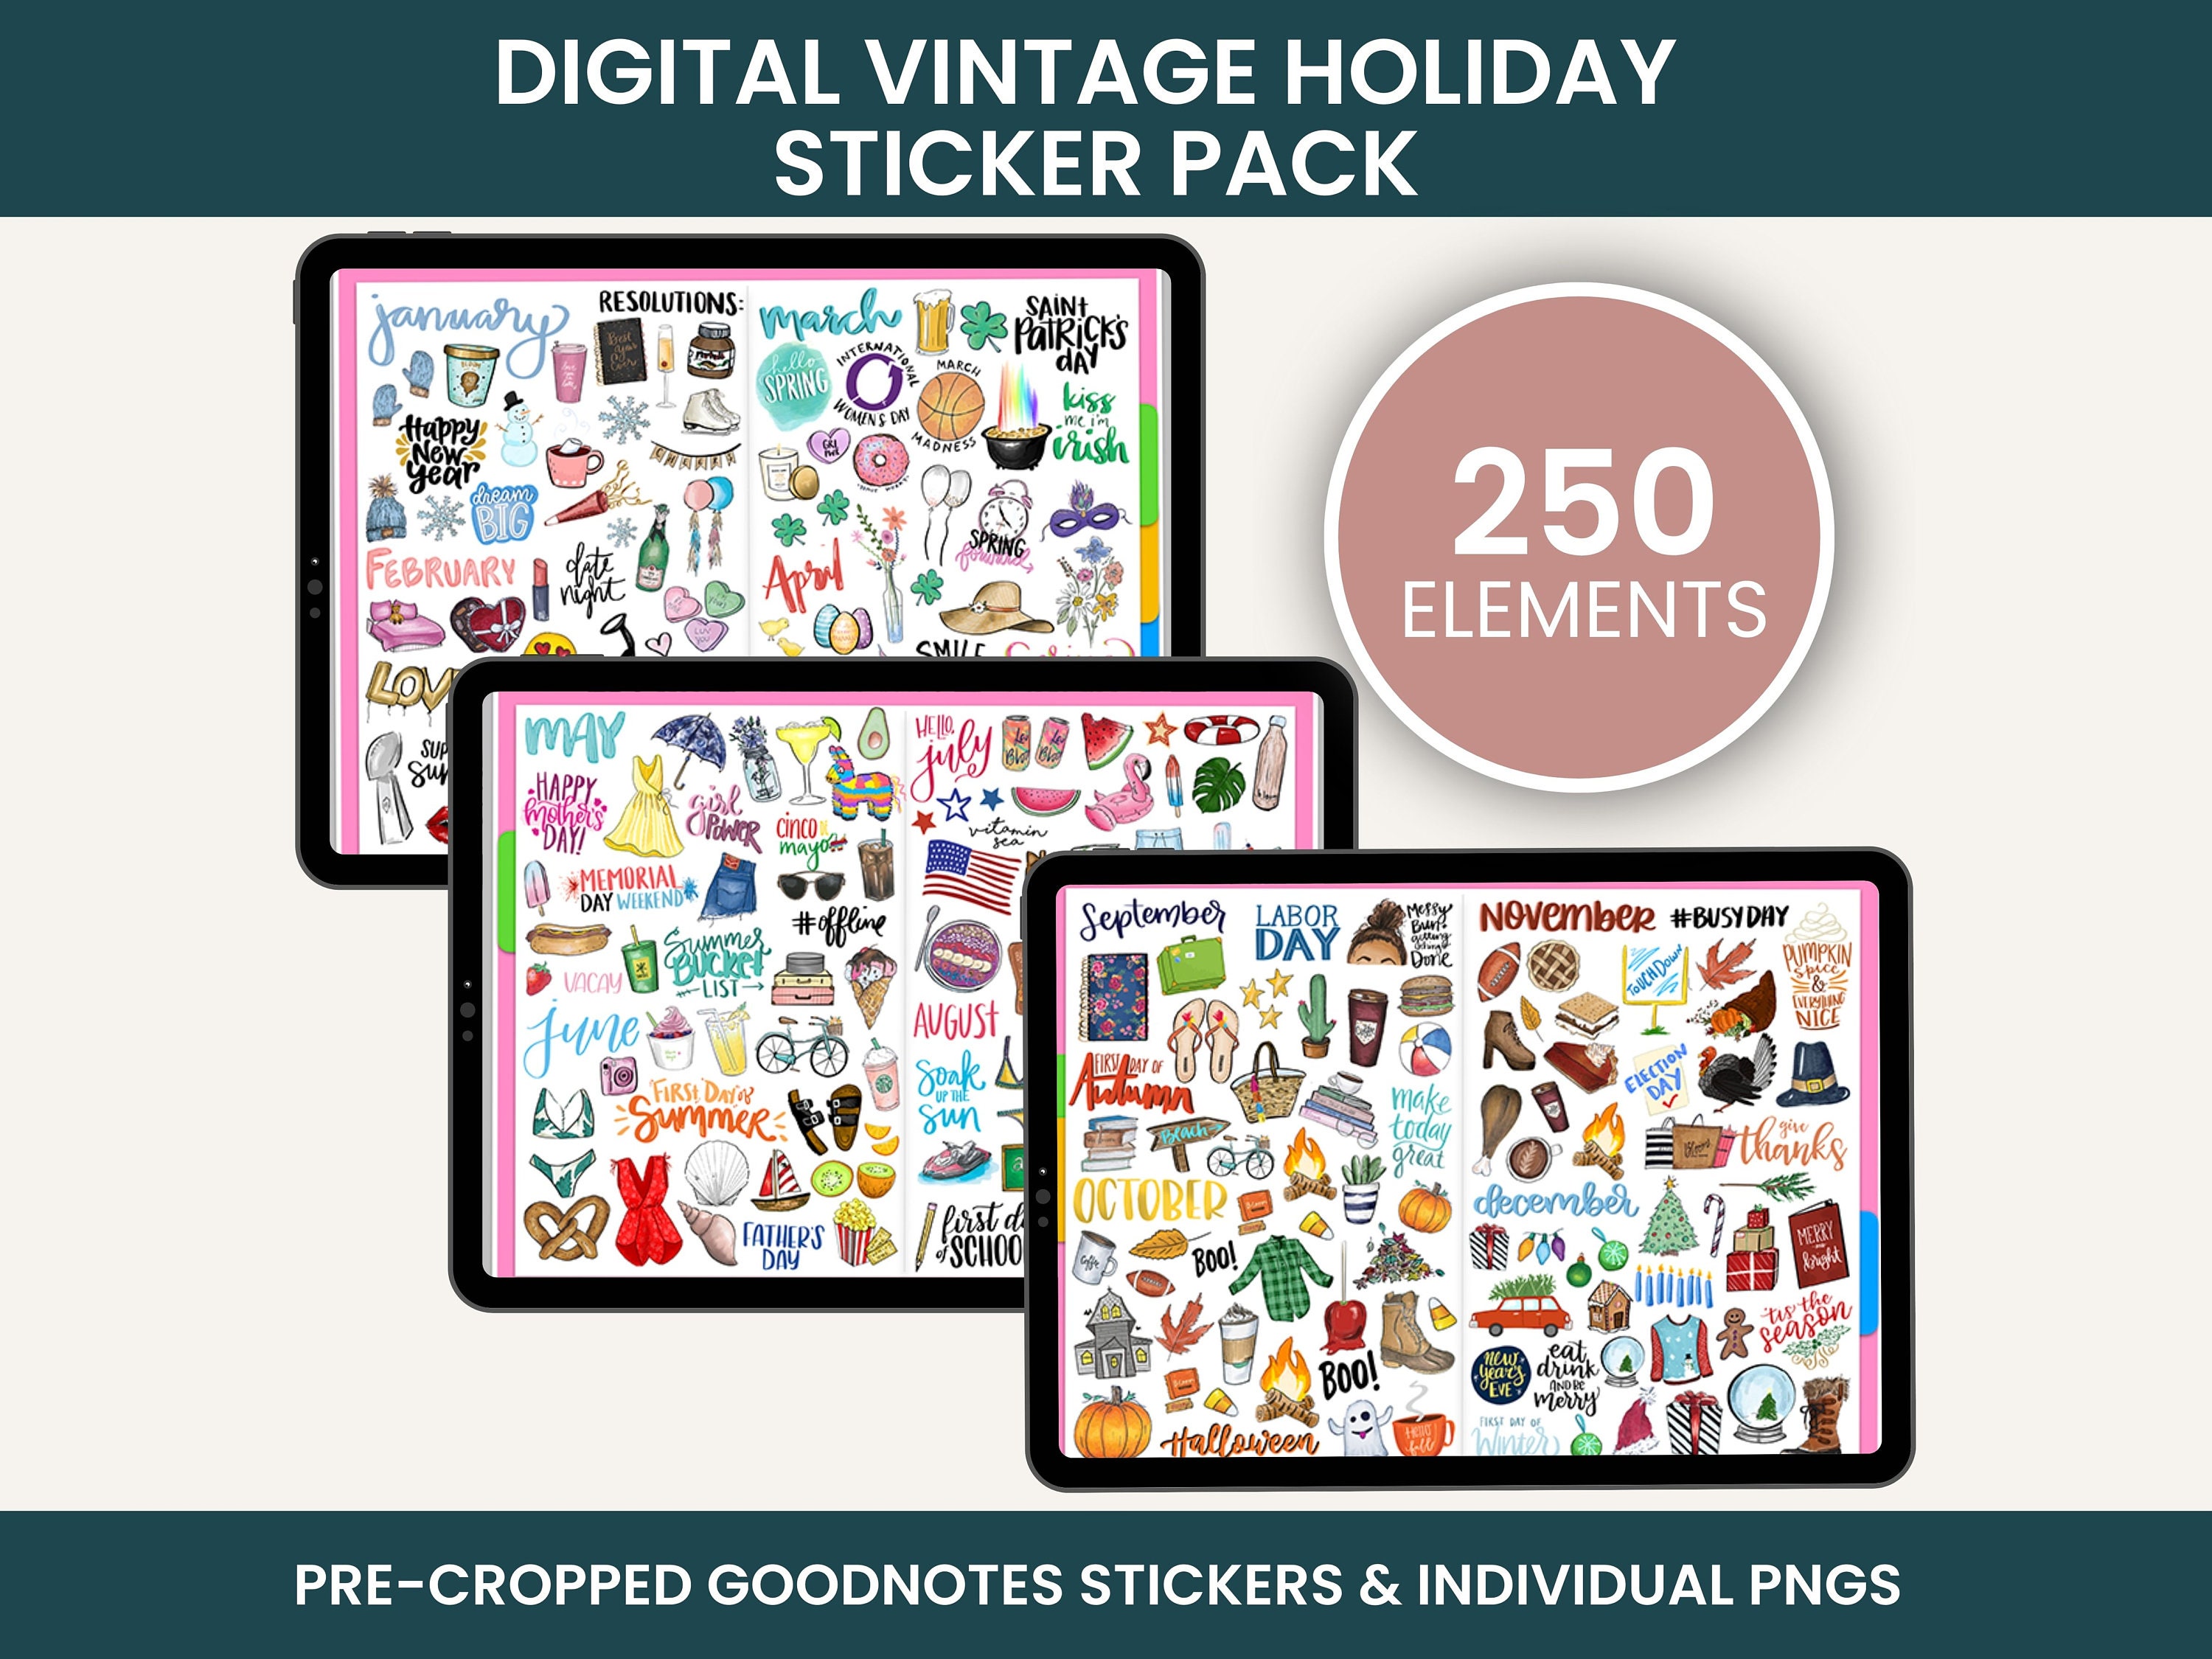 Holiday - Digital Stickers – Commit30